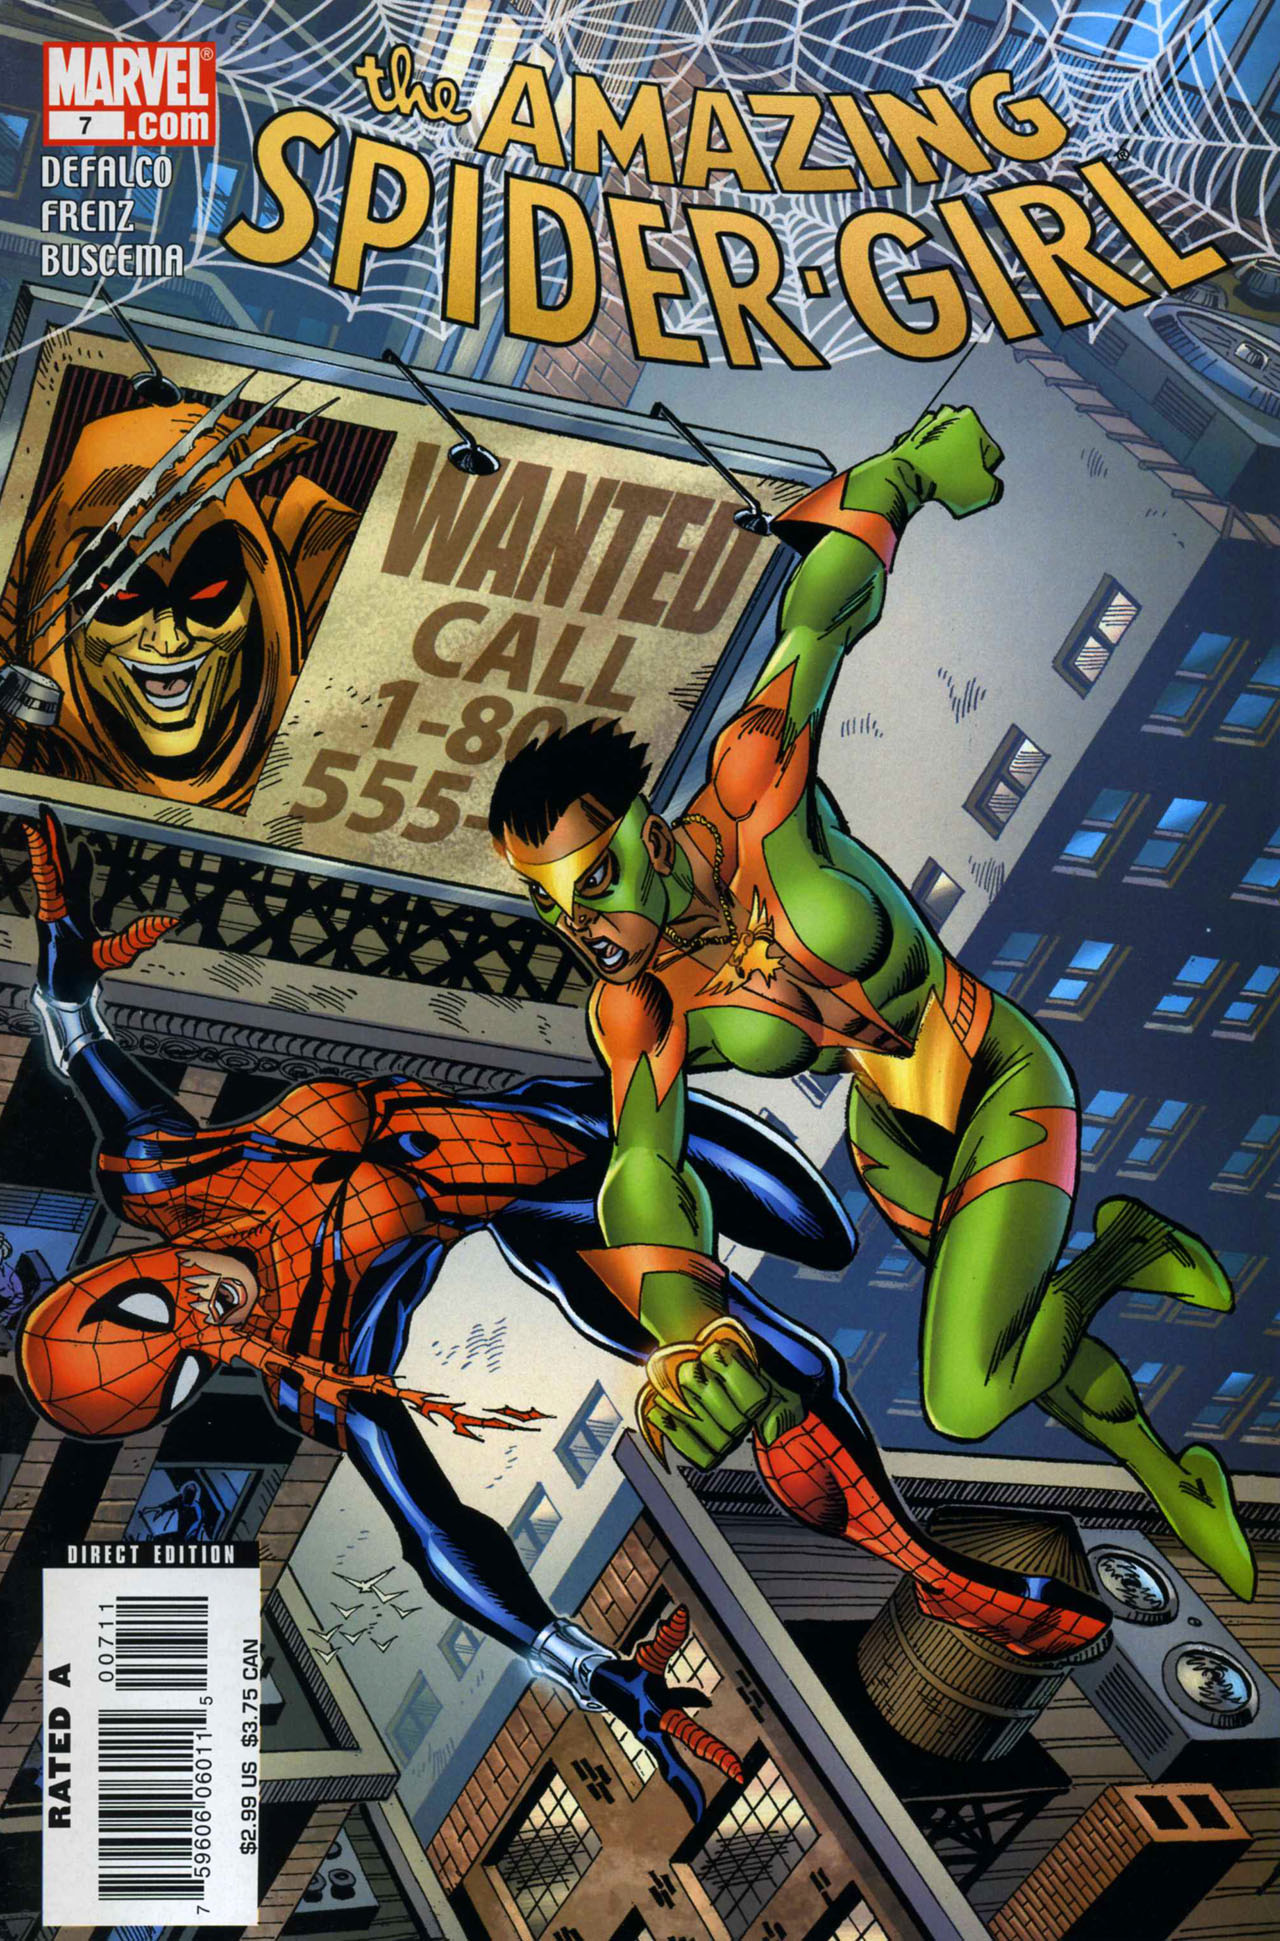 Read online Amazing Spider-Girl comic -  Issue #7 - 2